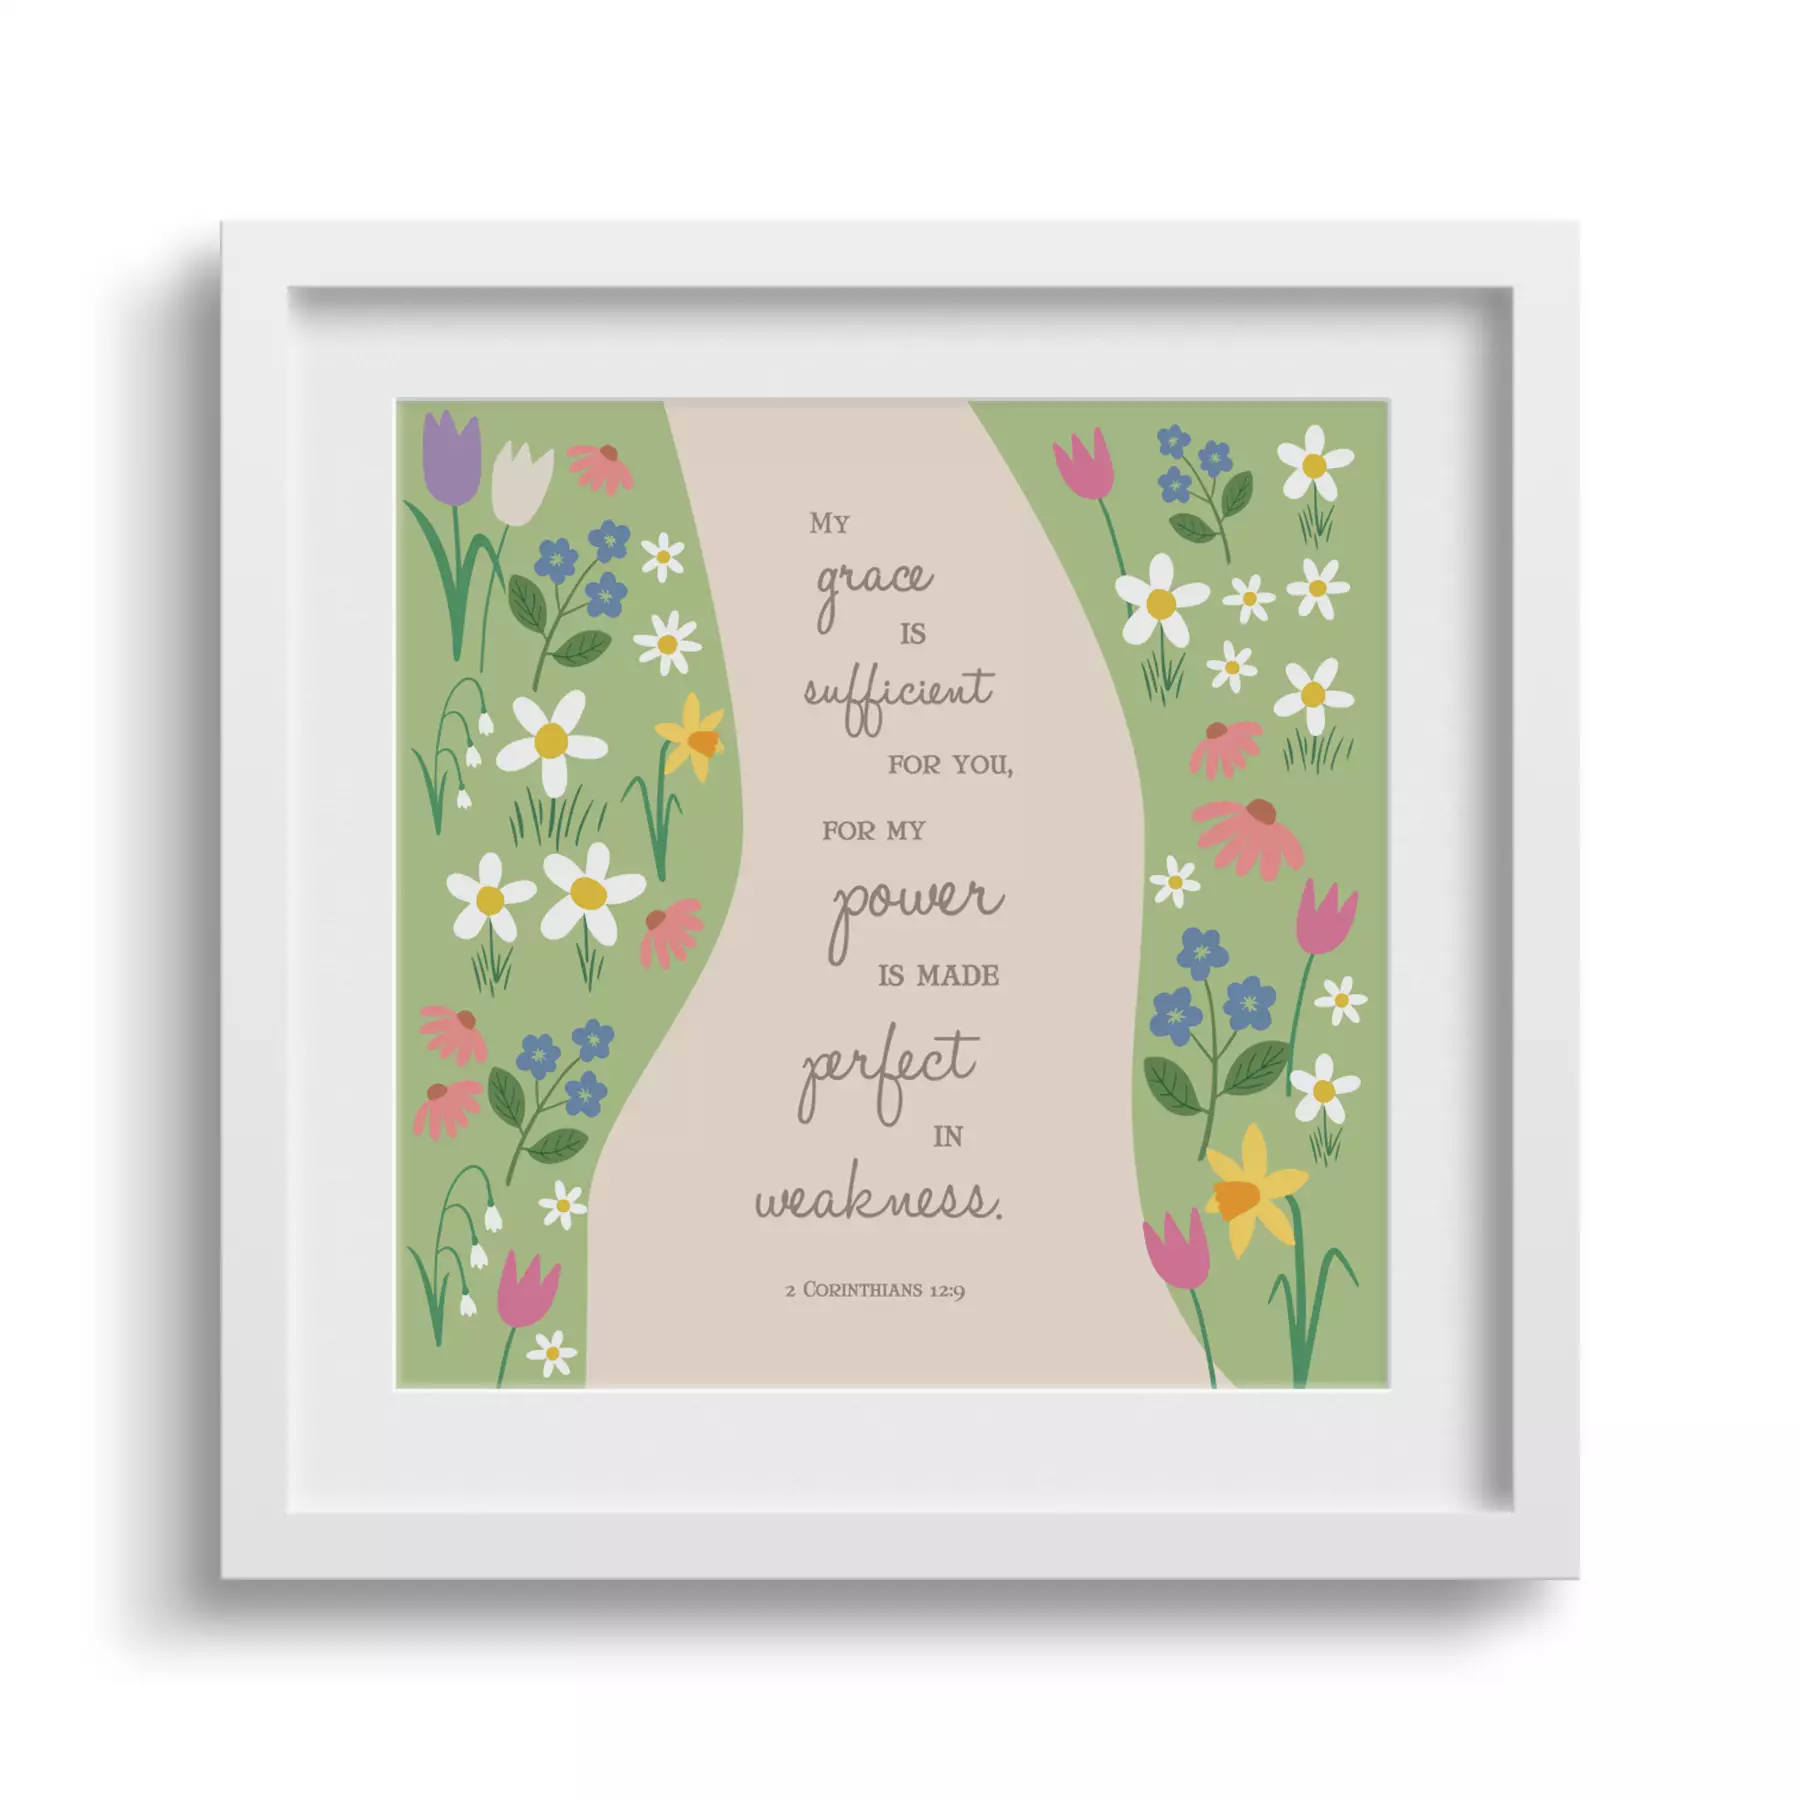 'My Grace is Sufficient' Framed Print - 6 x 6"